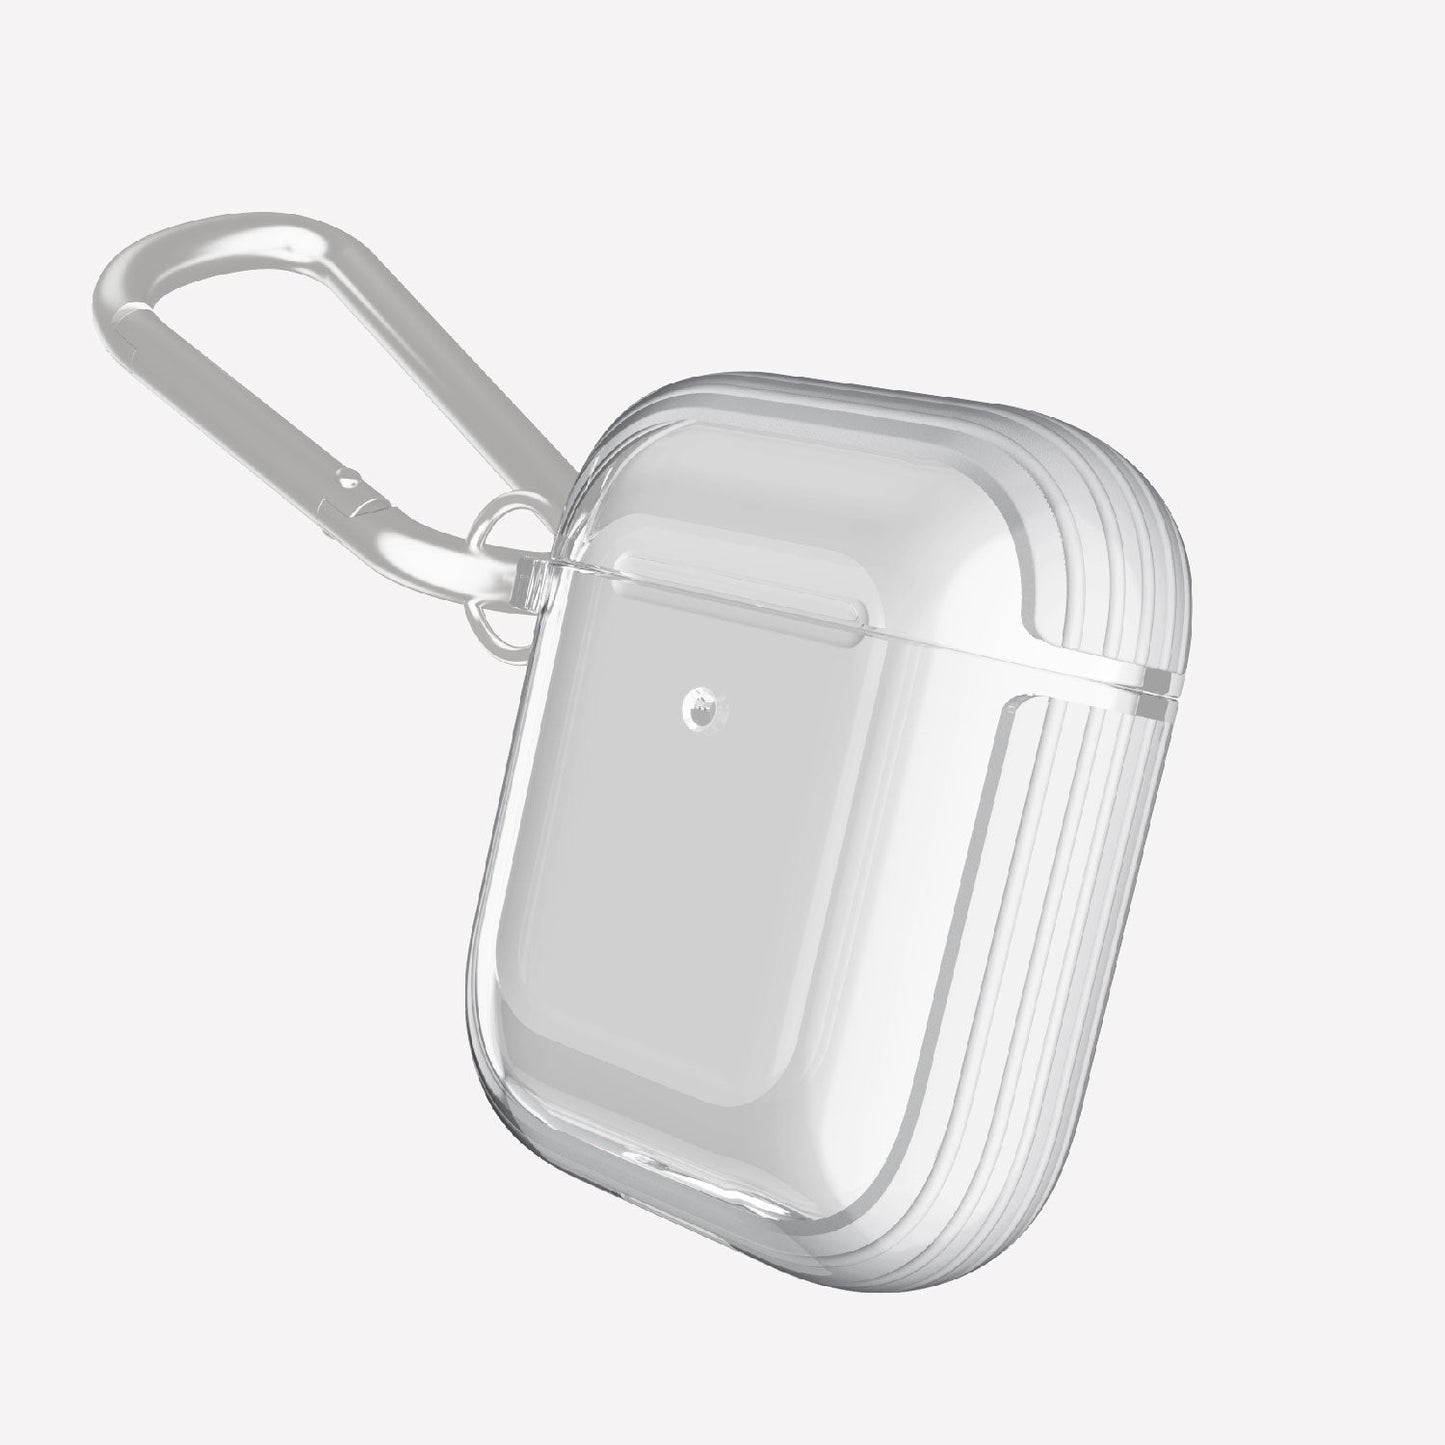 X-Doria Defense Clear Apple AirPods 2&1 Charging Case Cover with Carabiner Clip